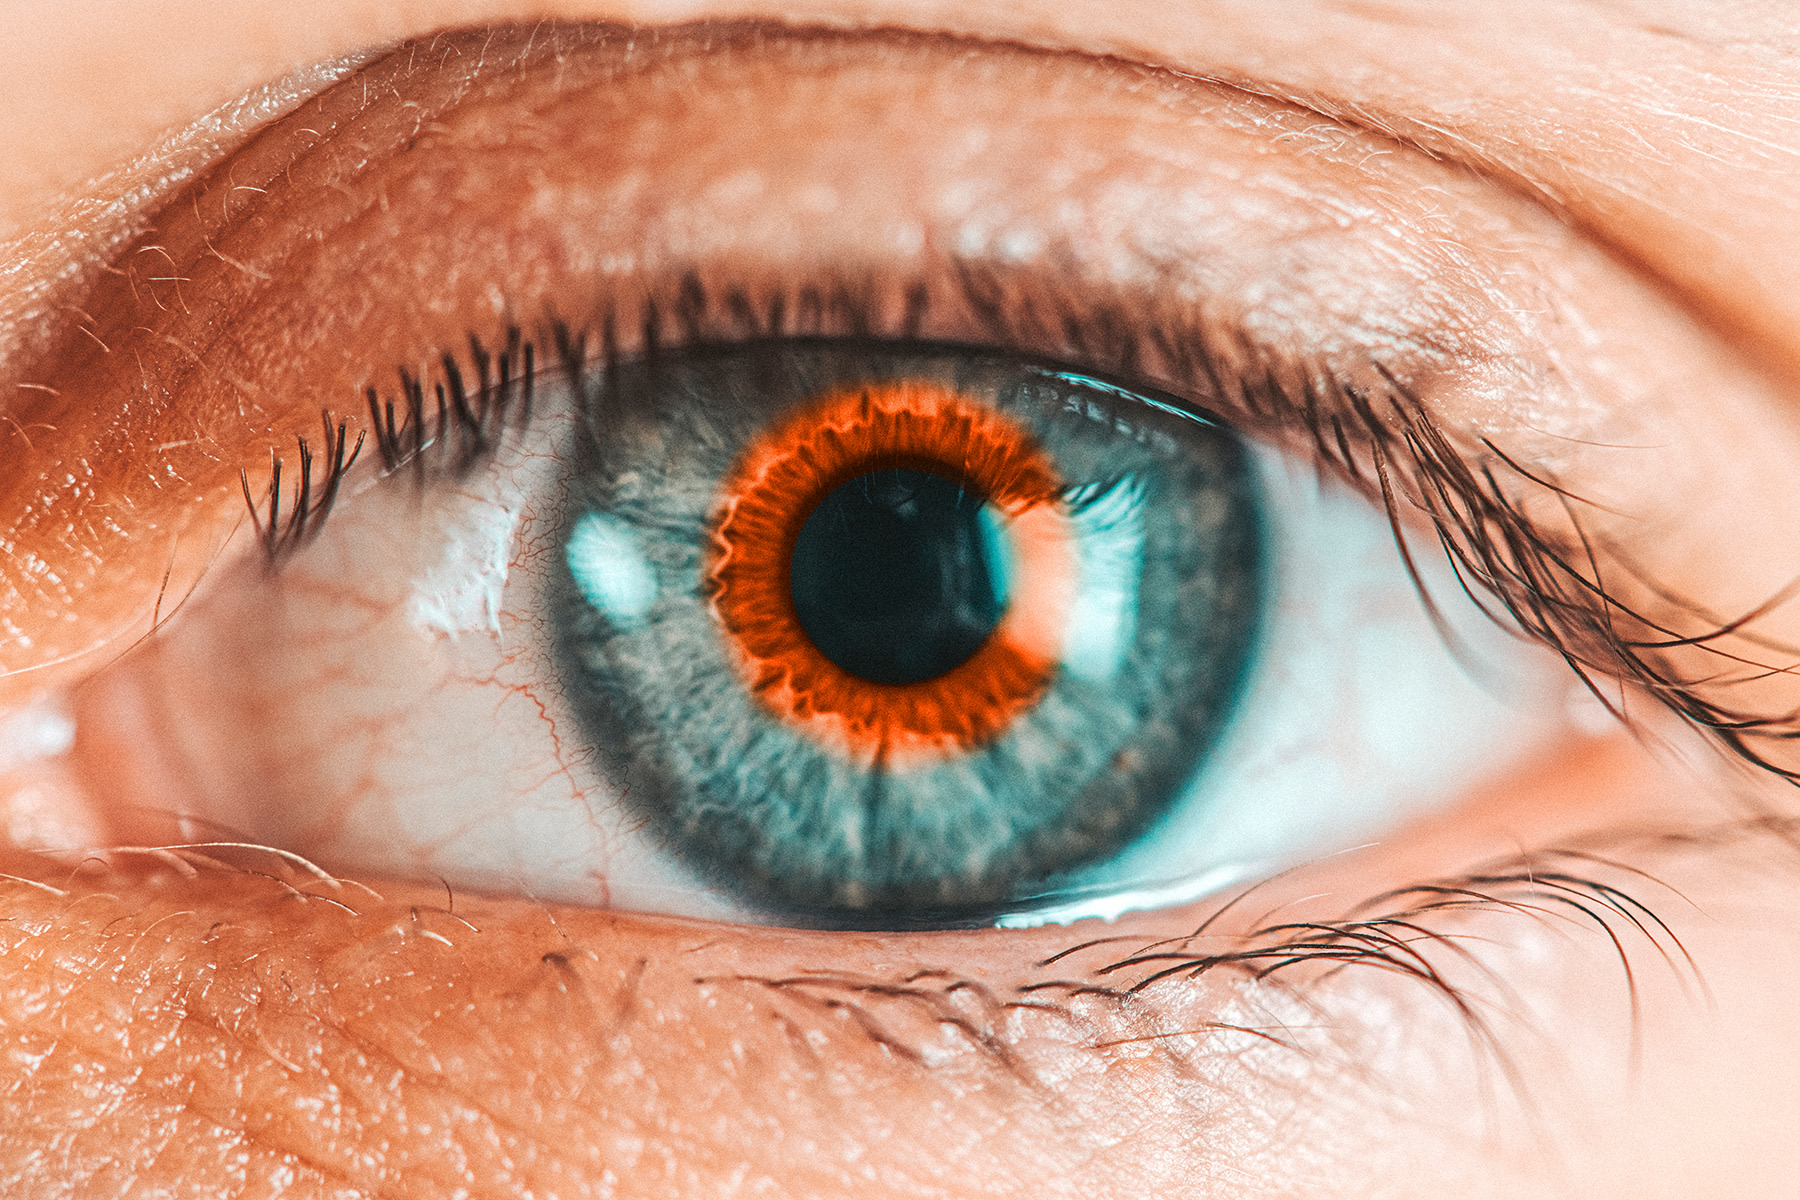 Blue eye zoomed in with orange Incentro logo